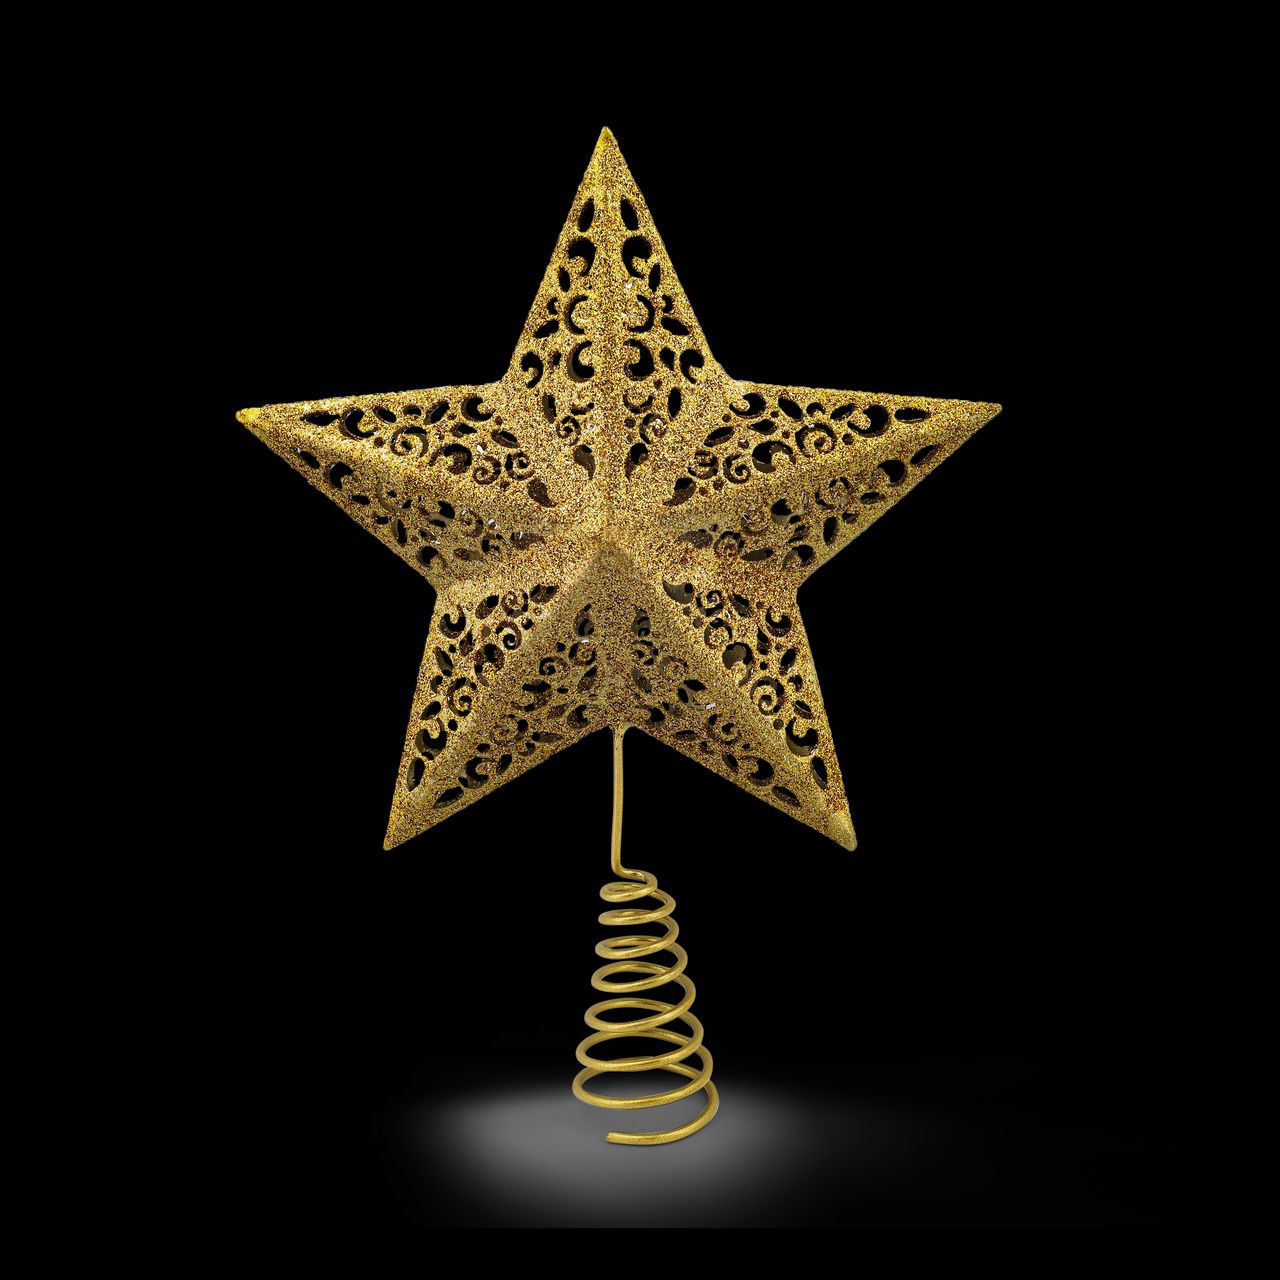 Gold Christmas Tree Topper  We just Love Christmas! The festive season, the giving of gifts, creating memories and being together with family and loved ones. Have lots of fun with our lovingly designed and created Christmas decorations, each one has a magic sparkle of elf dust!